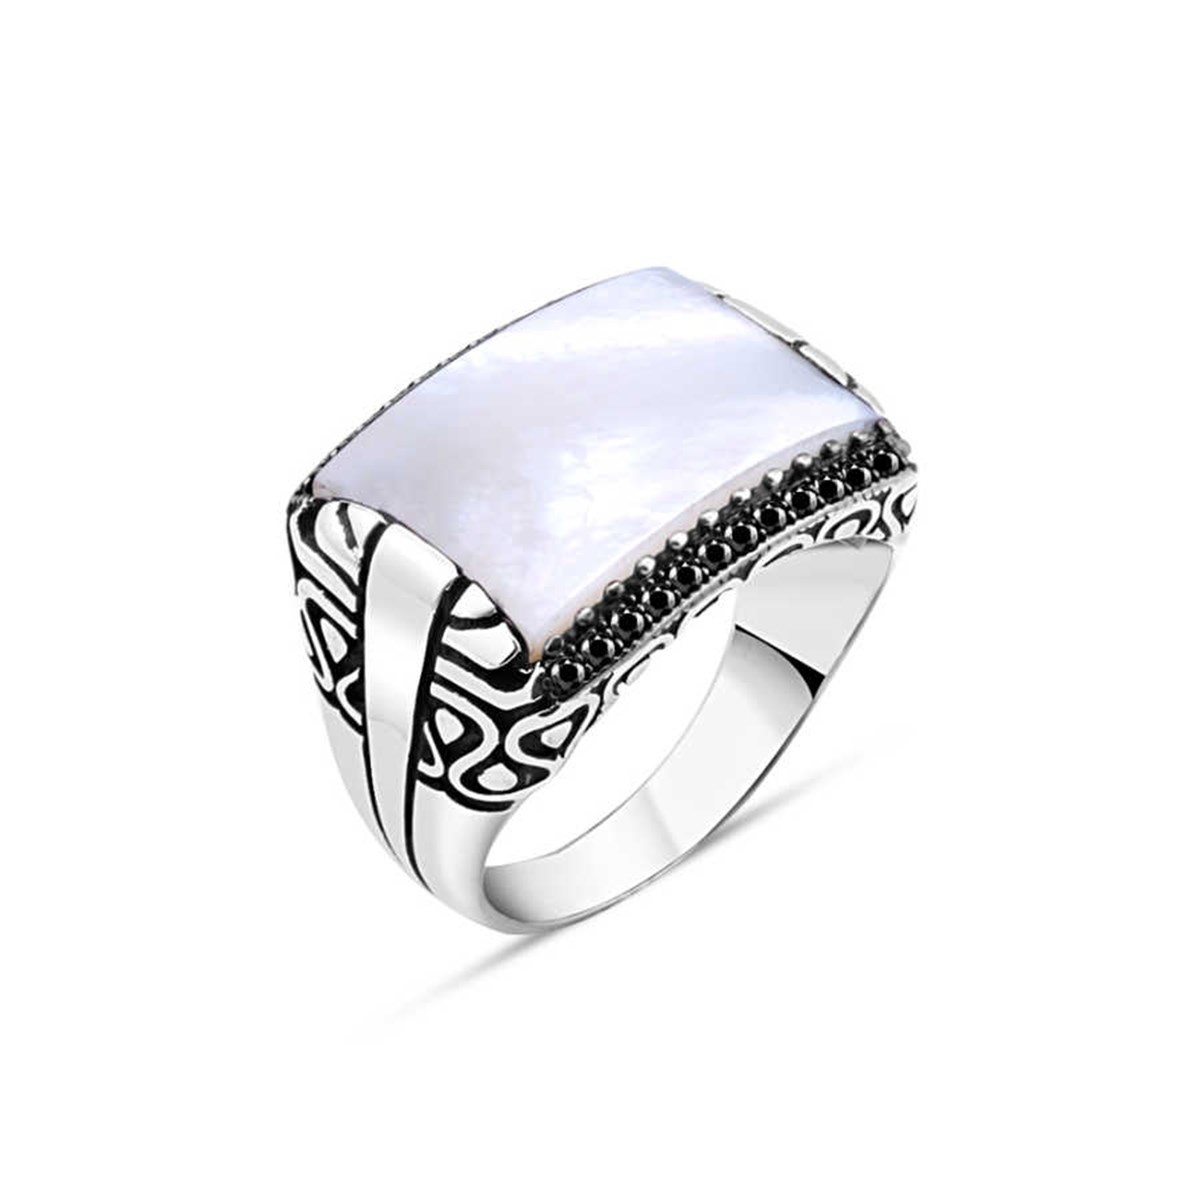 Mother of Pearl Stone Edges Tiny Black Zircon Stone Sterling Silver Men's Ring